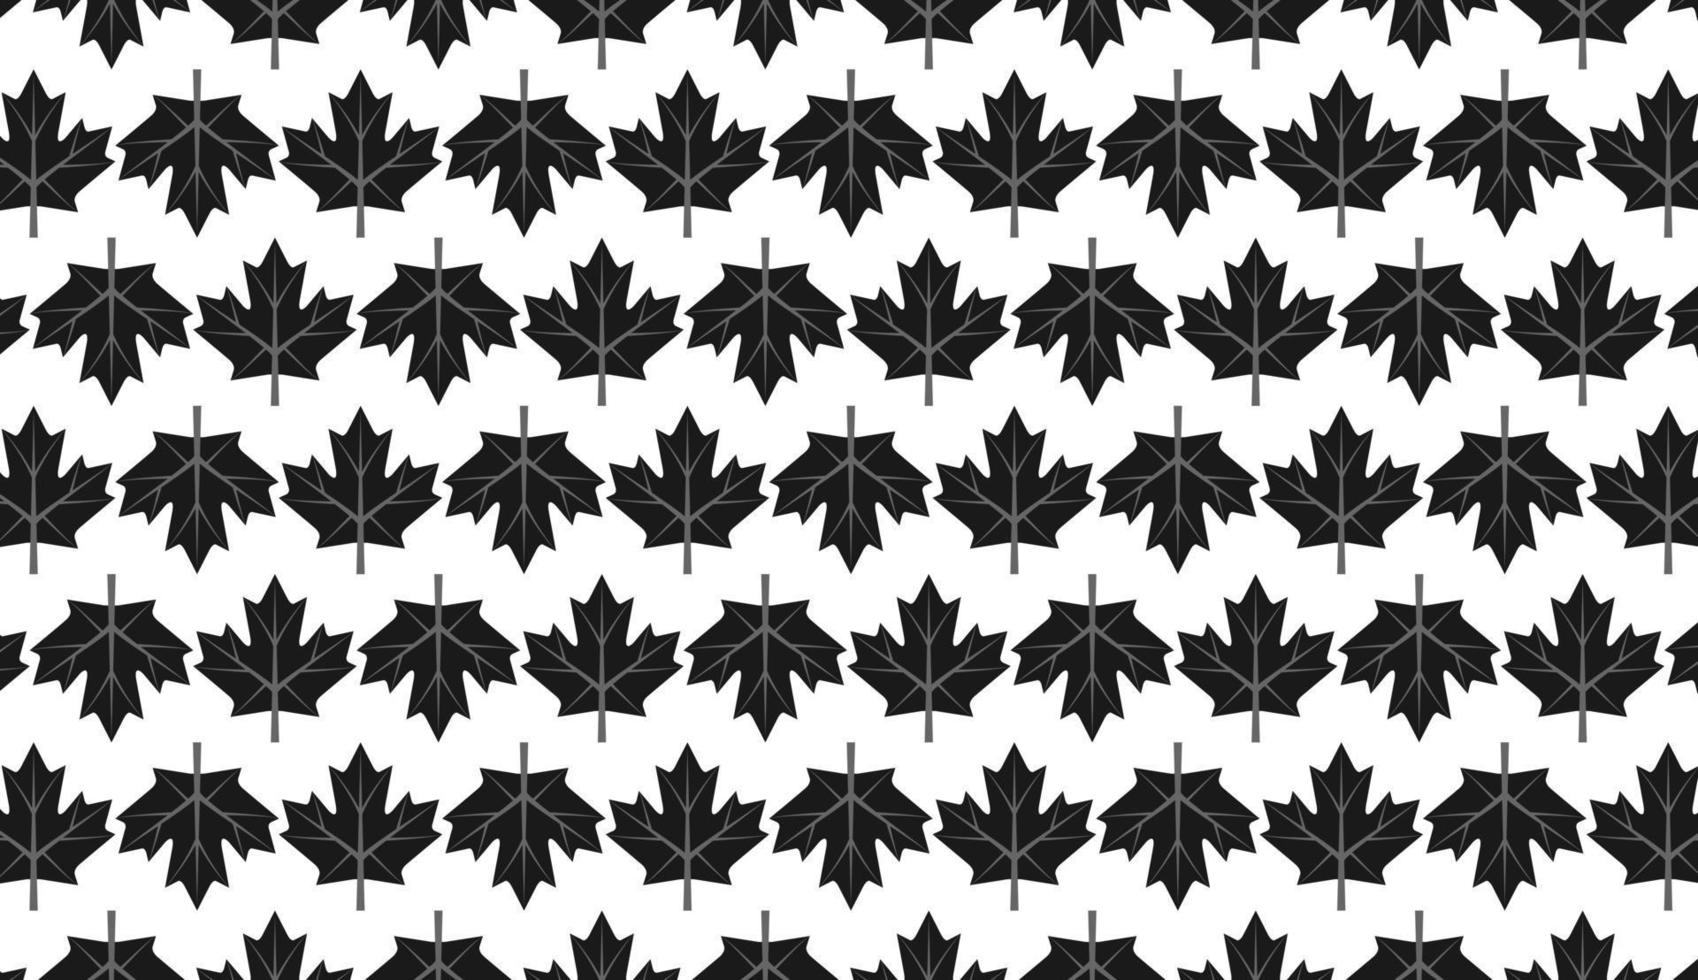 Seamless pattern. Gray black maple leaf pattern. Simple pattern design. Can be used for posters, brochures, postcards, and other printing needs. Vector illustration